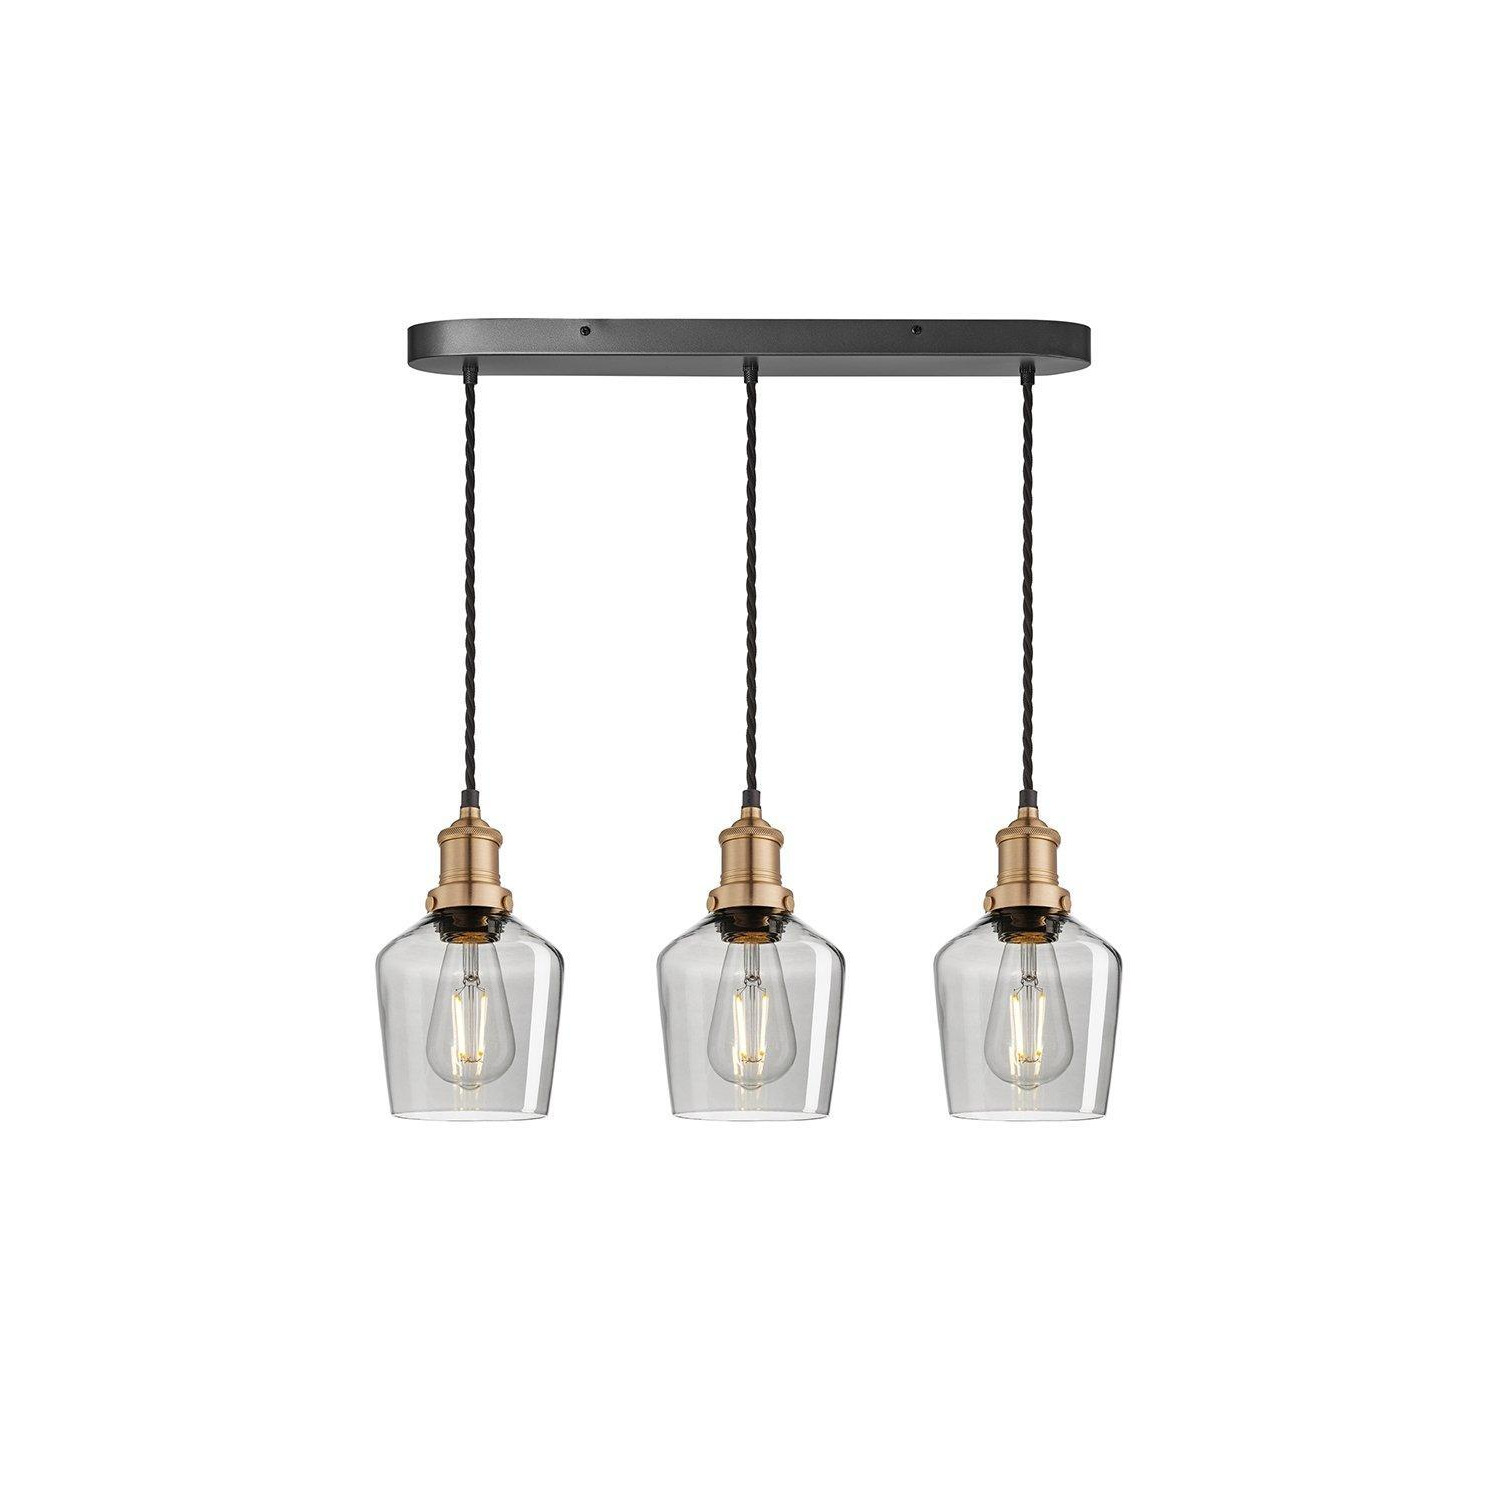 Brooklyn Tinted Glass Schoolhouse 3 Wire Oval Cluster Lights, 5.5 inch, Smoke Grey, Brass holder